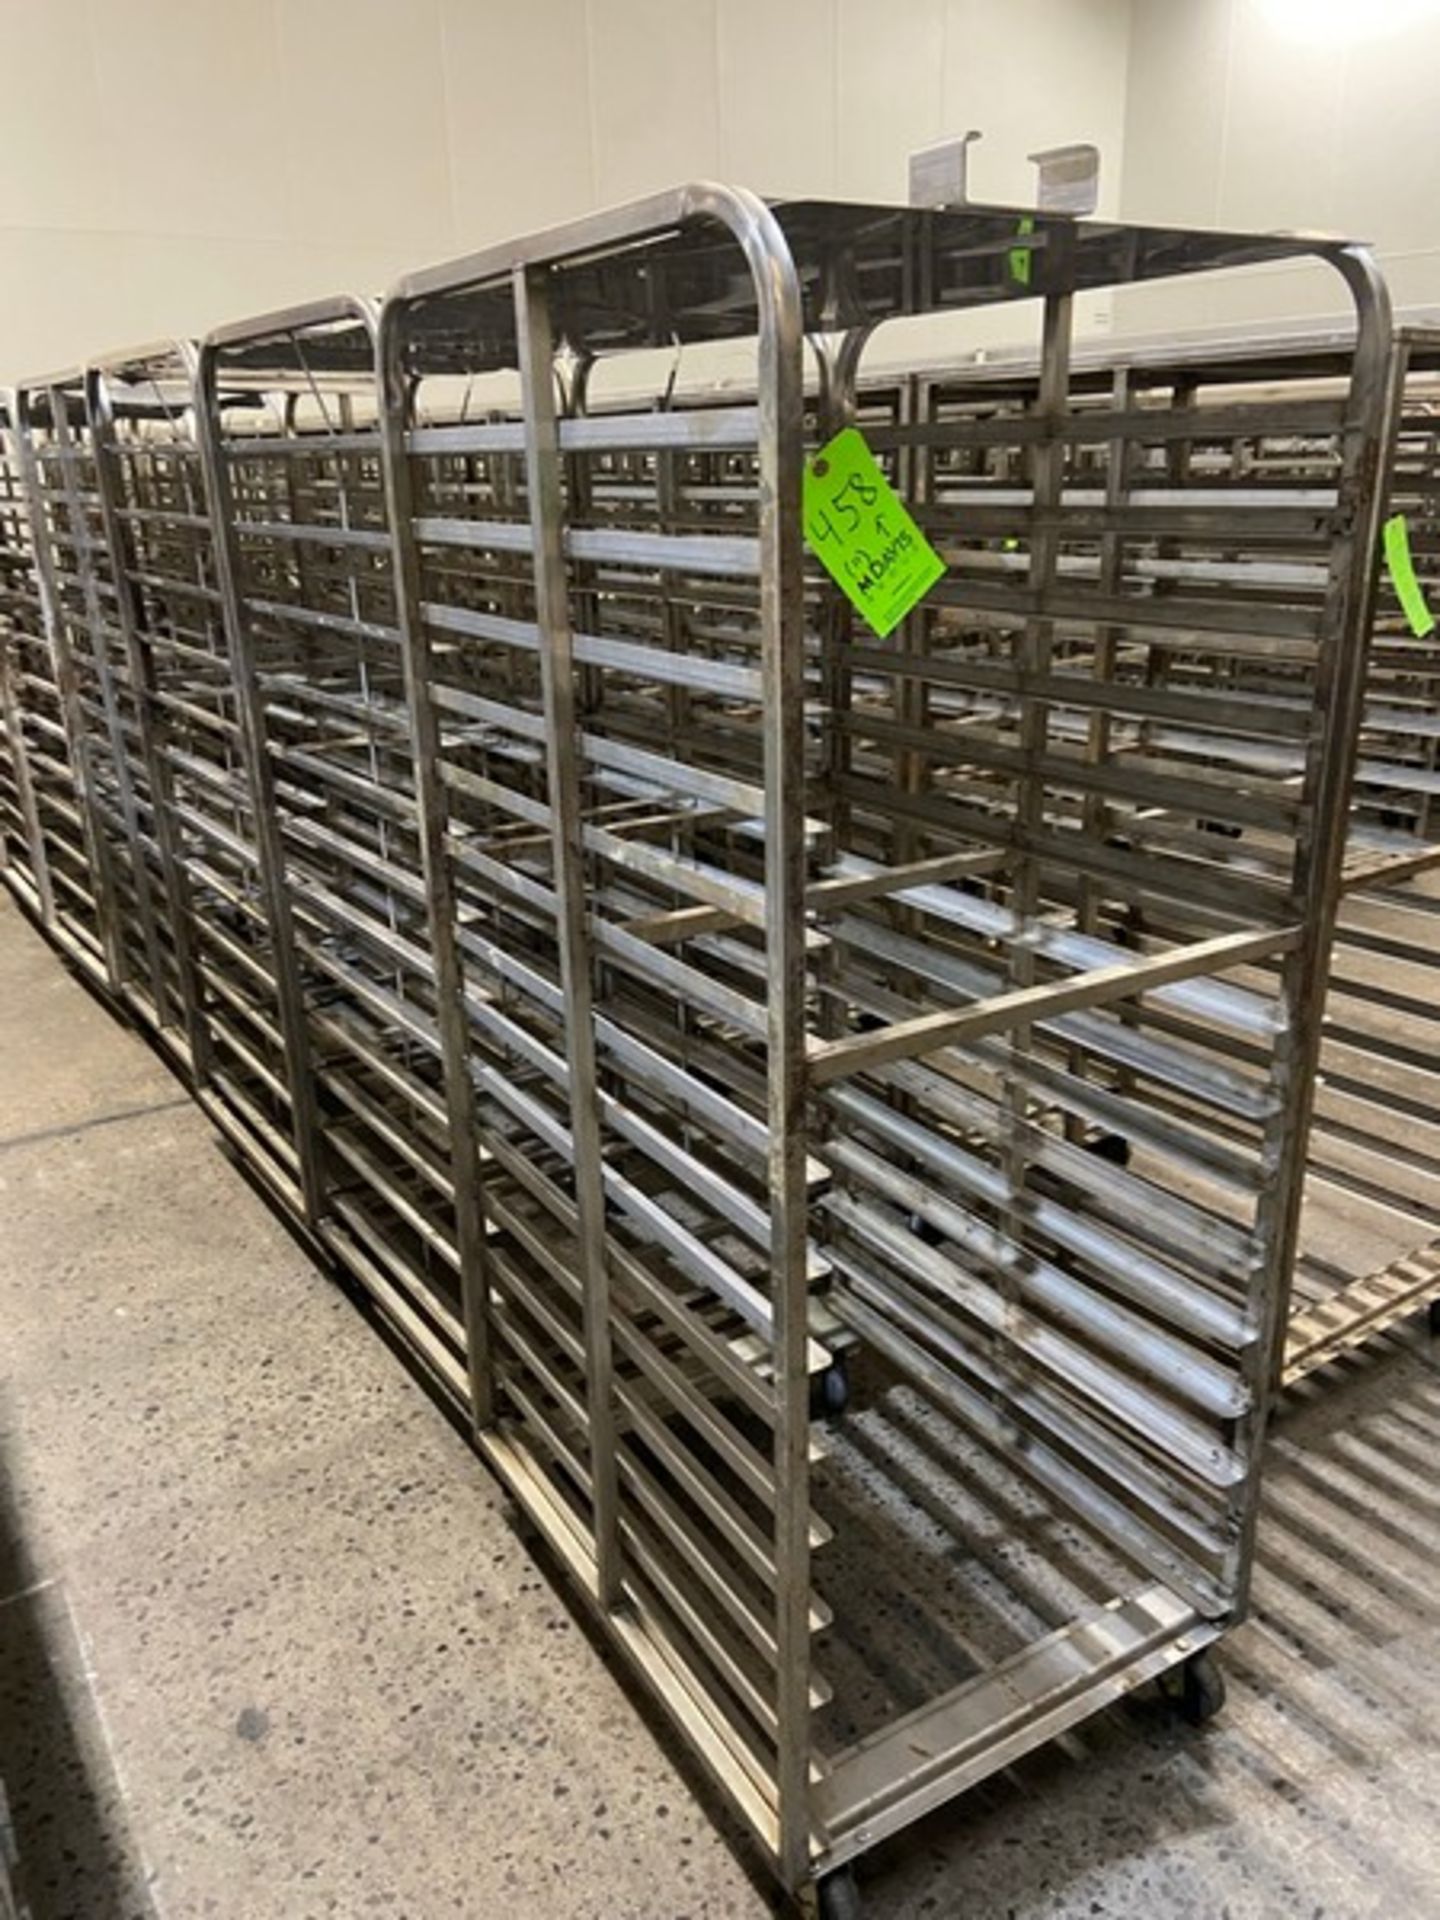 (11) BAKING PAN RACKS, MOUNTED ON CASTERS (LOCATED IN CALLERY, PA)